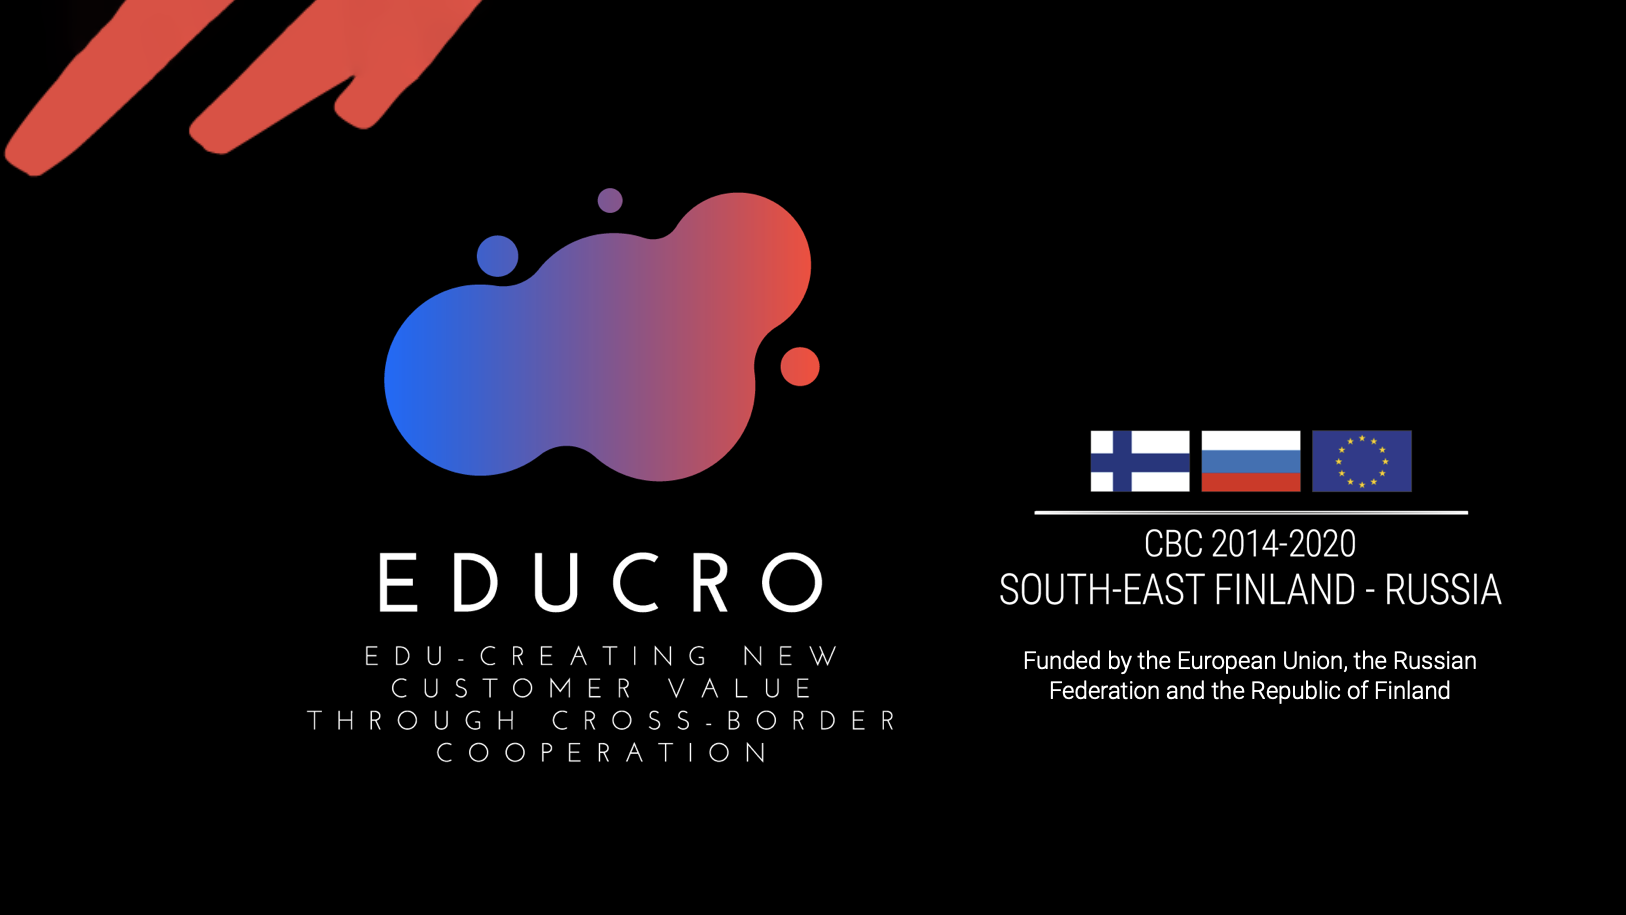 The logos of the EDUCRO project and its funding partner CBC against a black background.